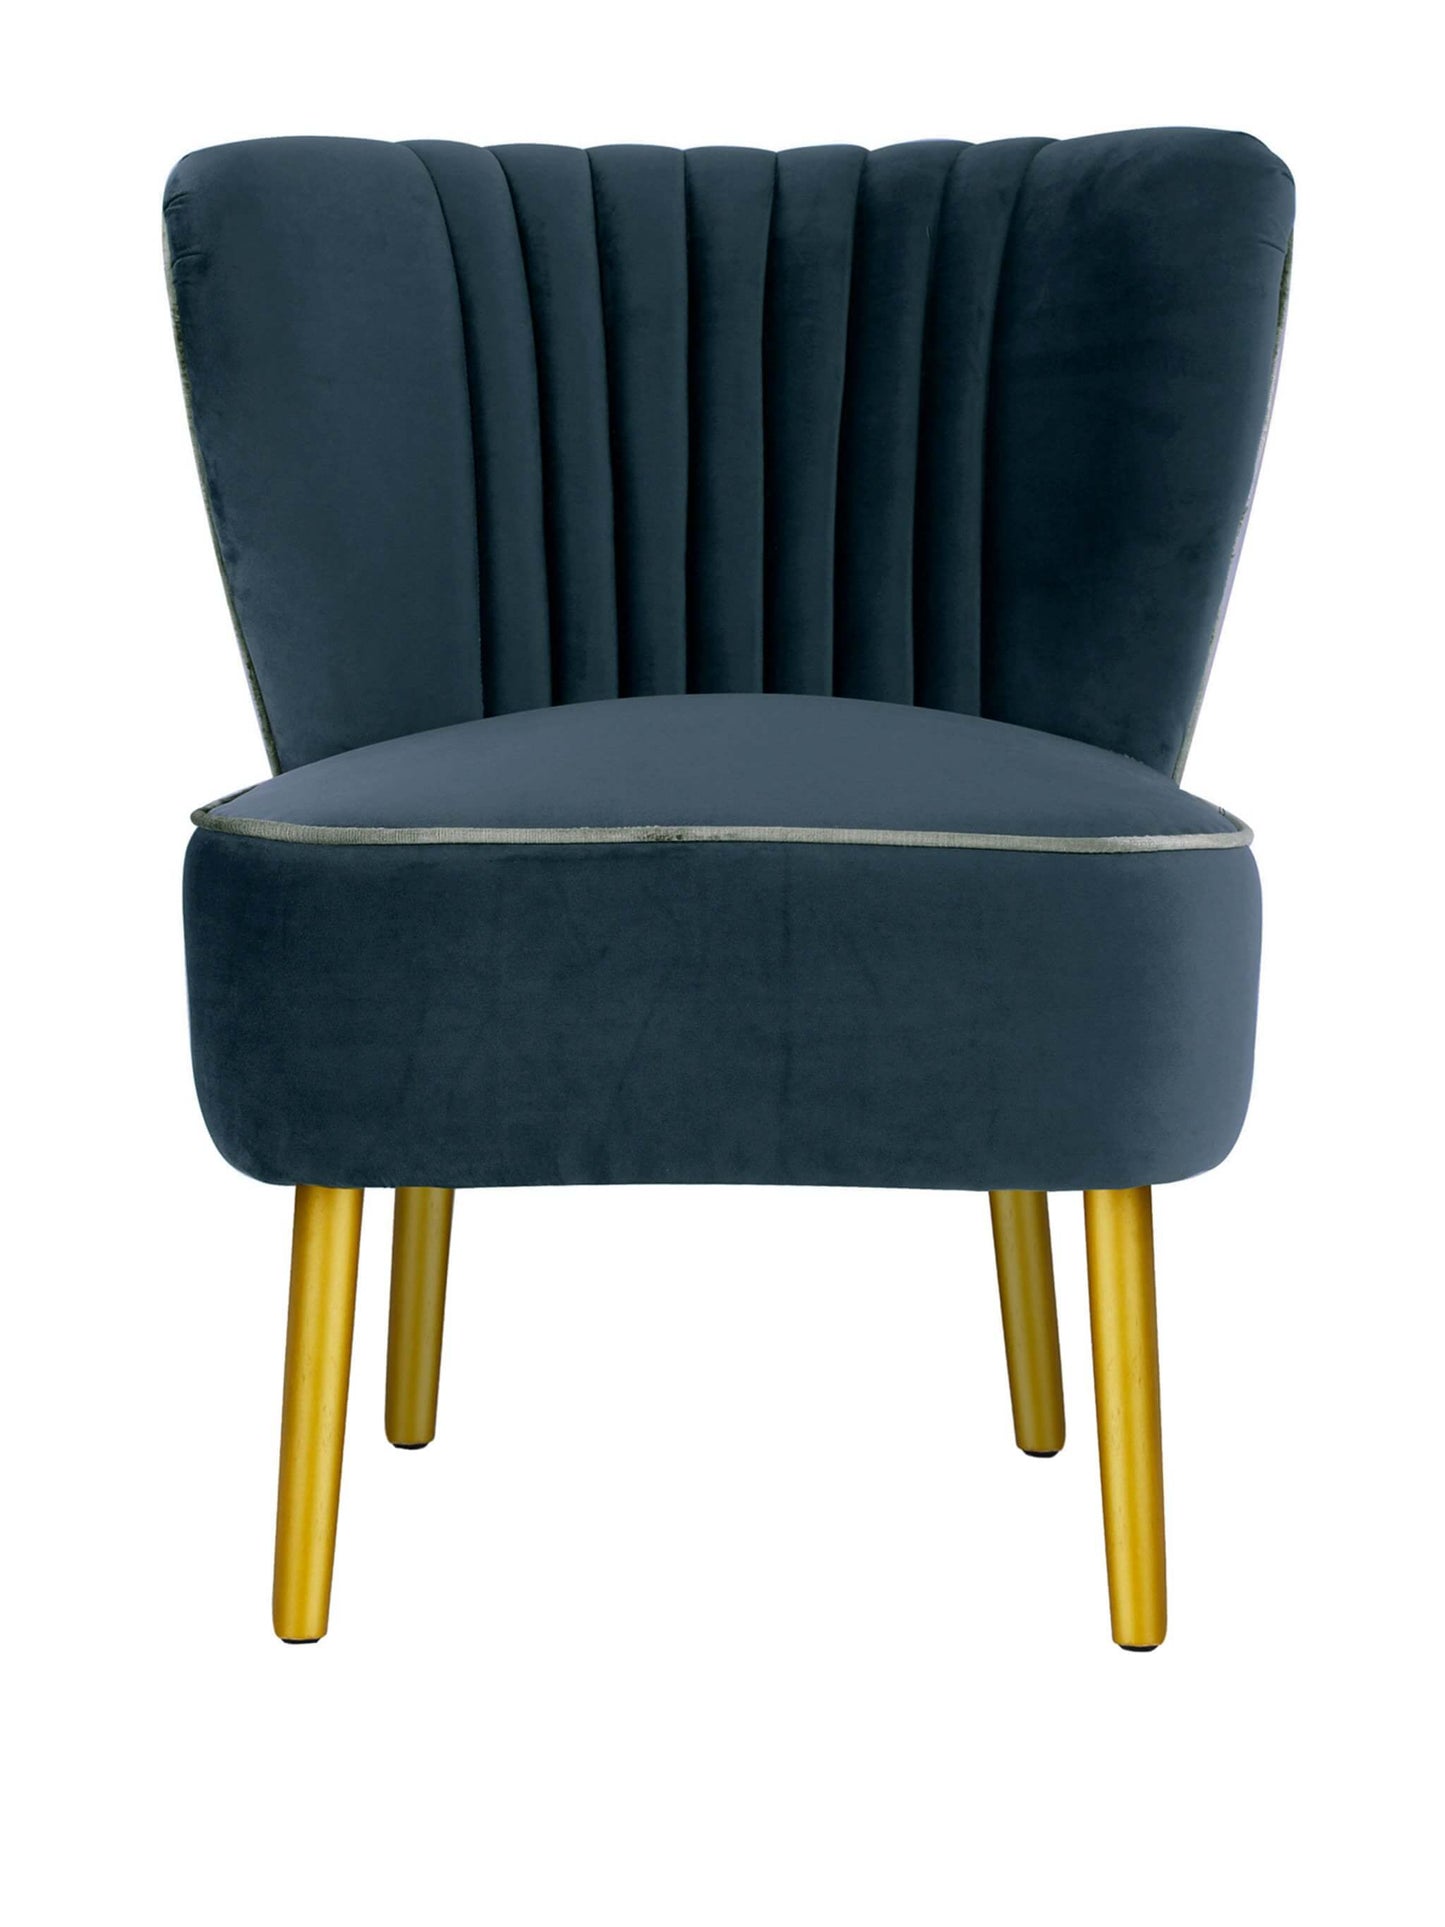 Slipper Chair French Navy Blue - Shop Charlies Interiors